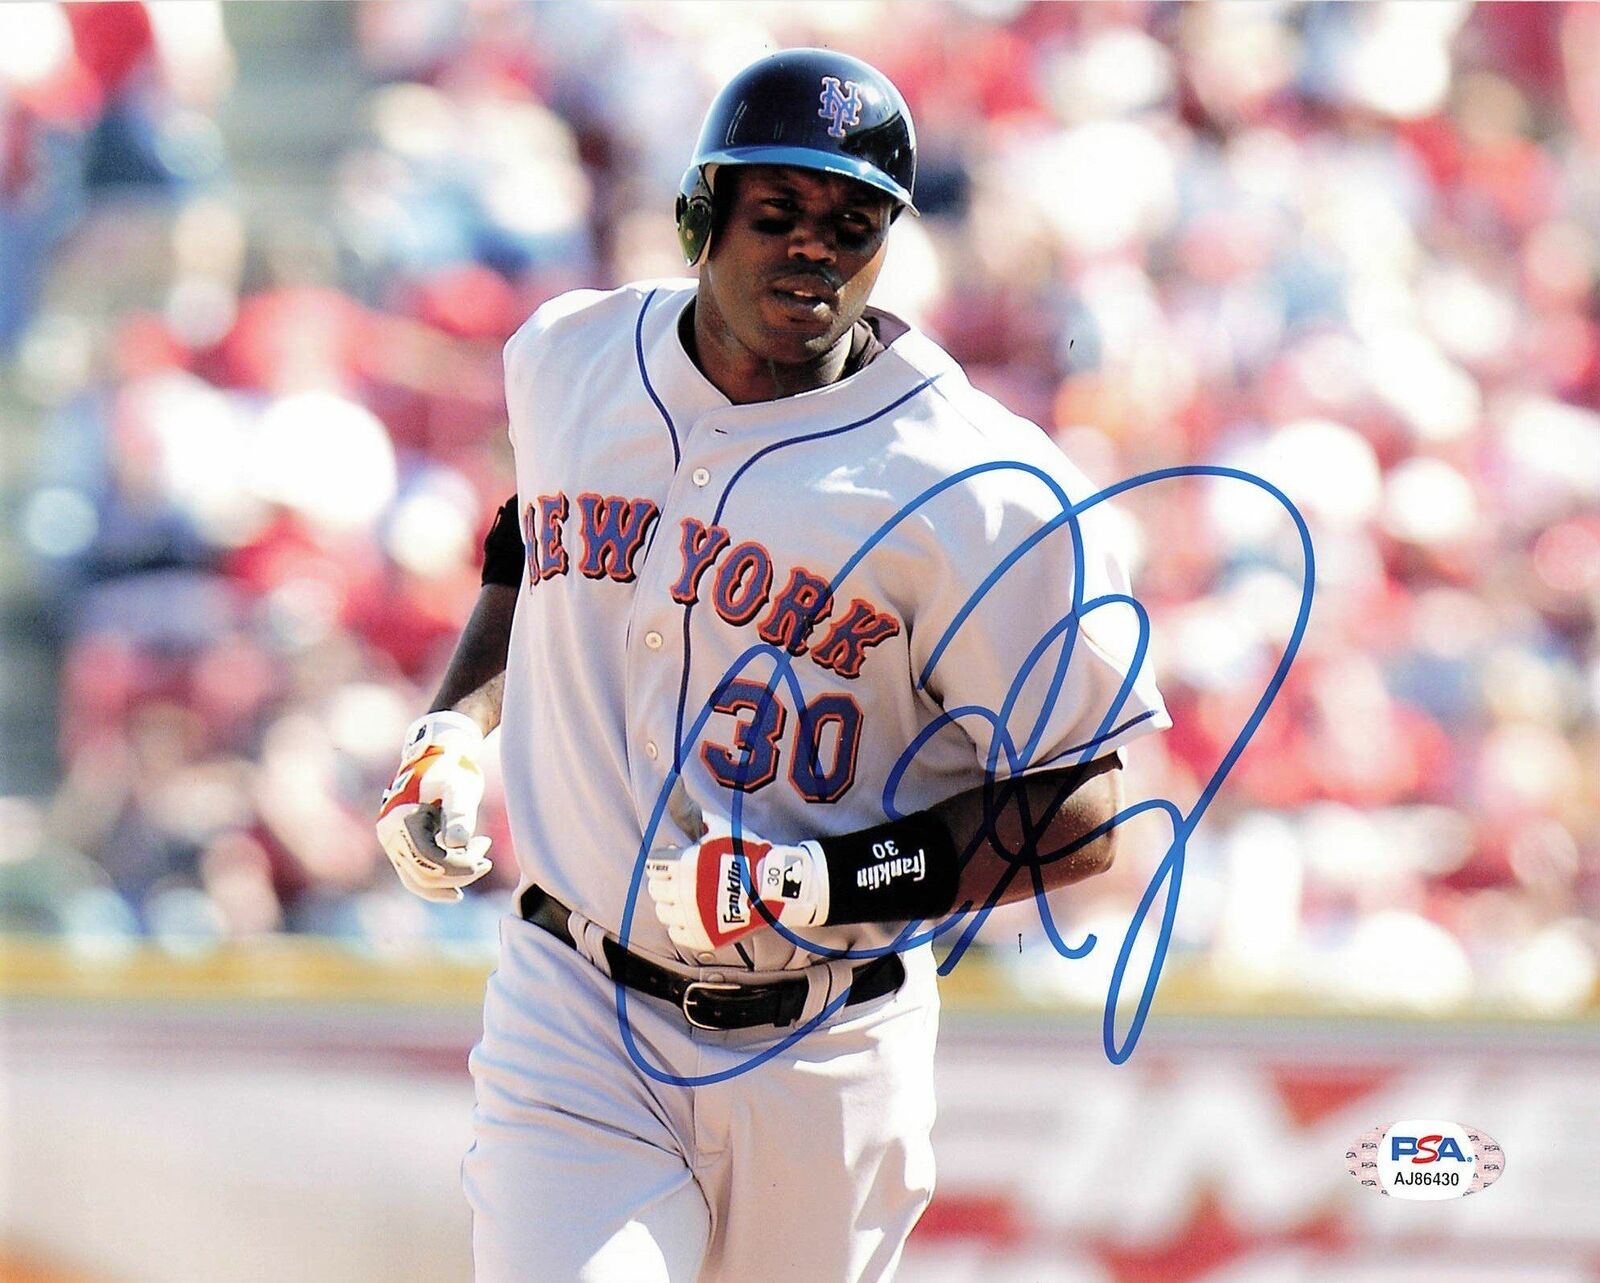 CLIFF FLOYD signed 8x10 Photo Poster painting PSA/DNA New York Mets Autographed